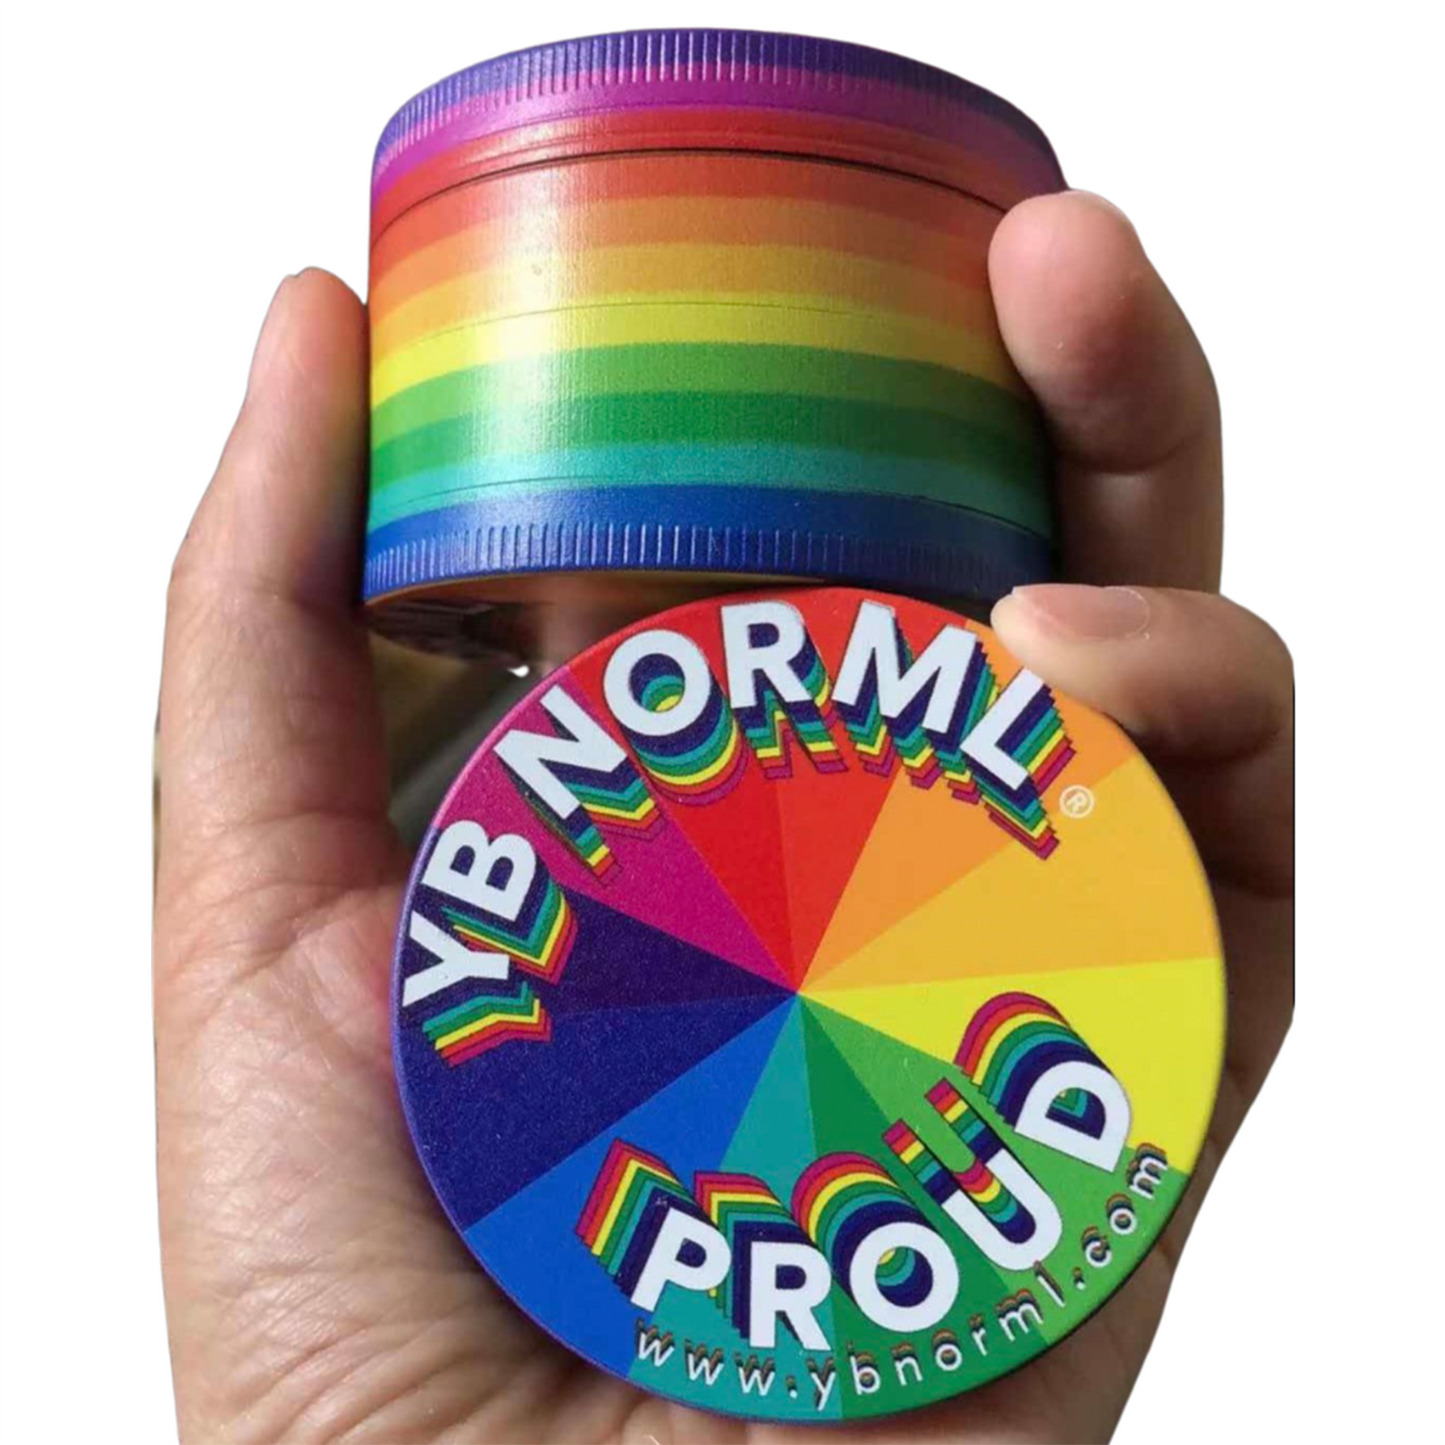 PROUD YB NORML Grinder 63mm 4 Stage Kit